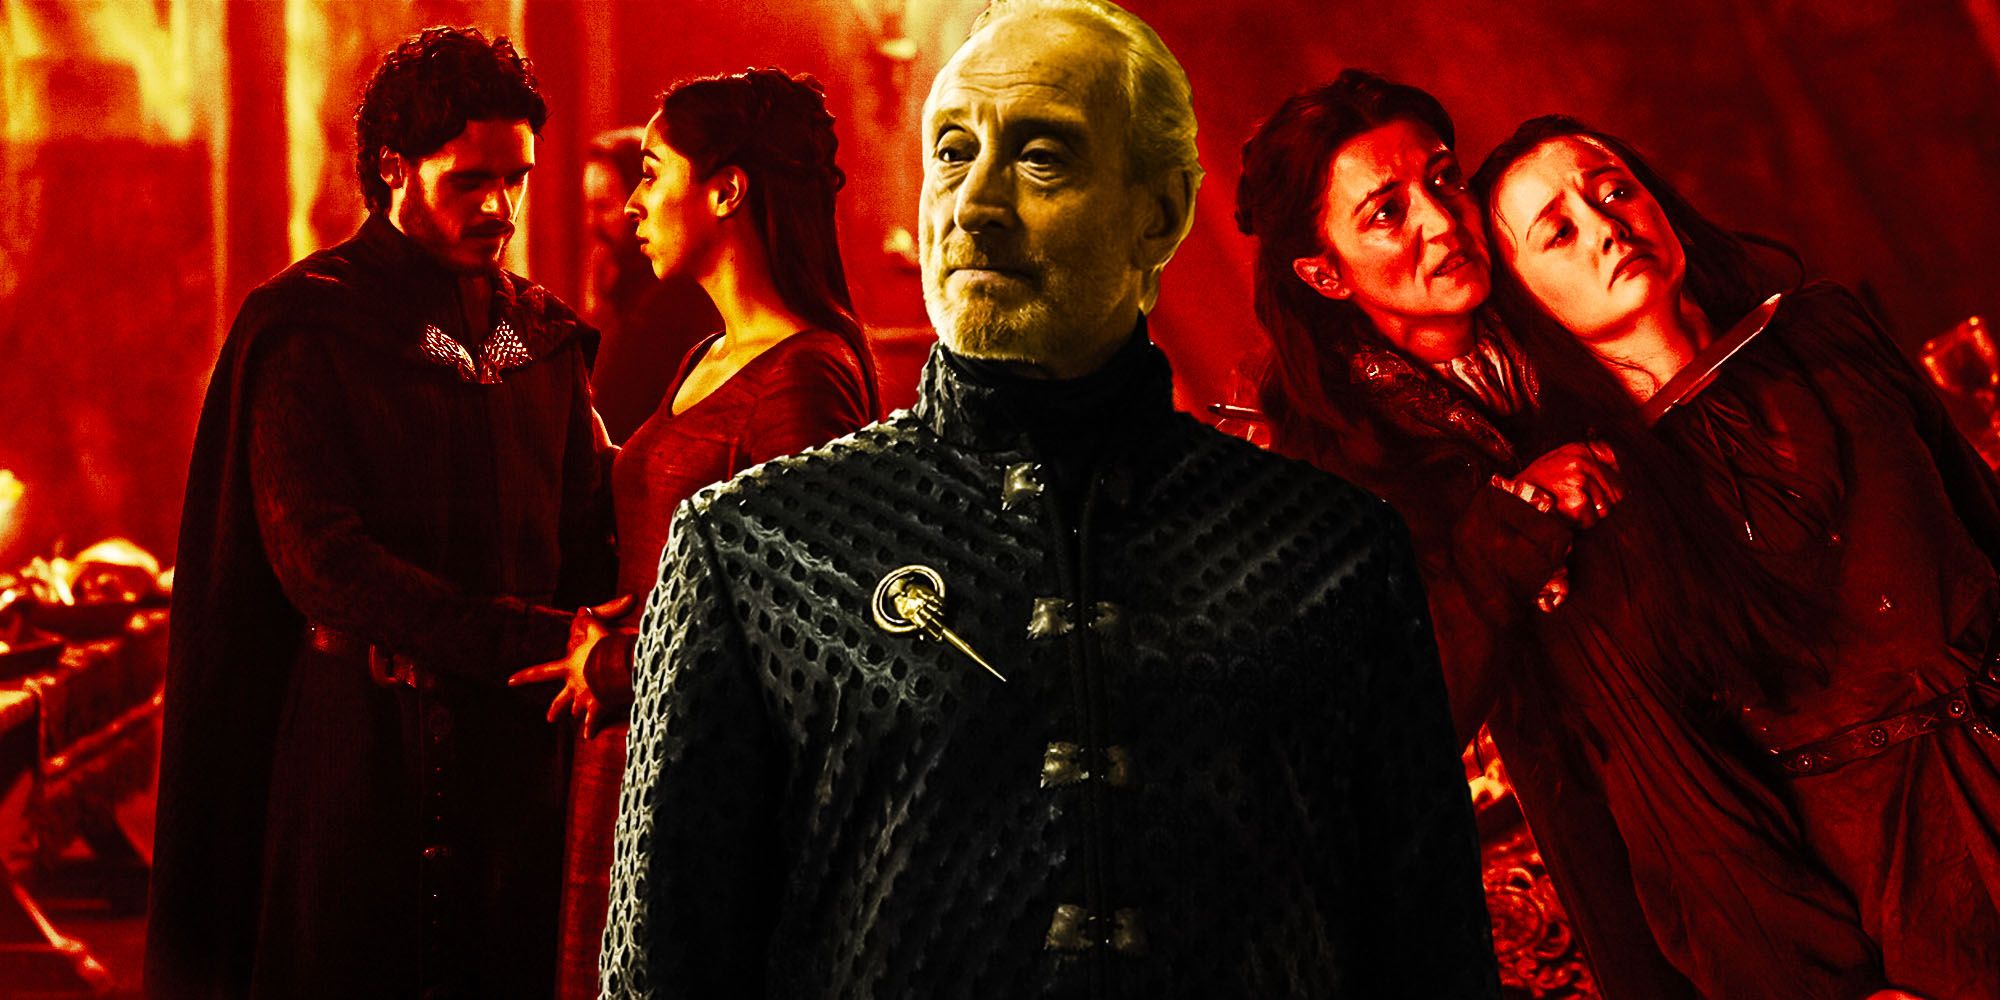 Game of thrones deleted tywin lannister scene teased the red wedding